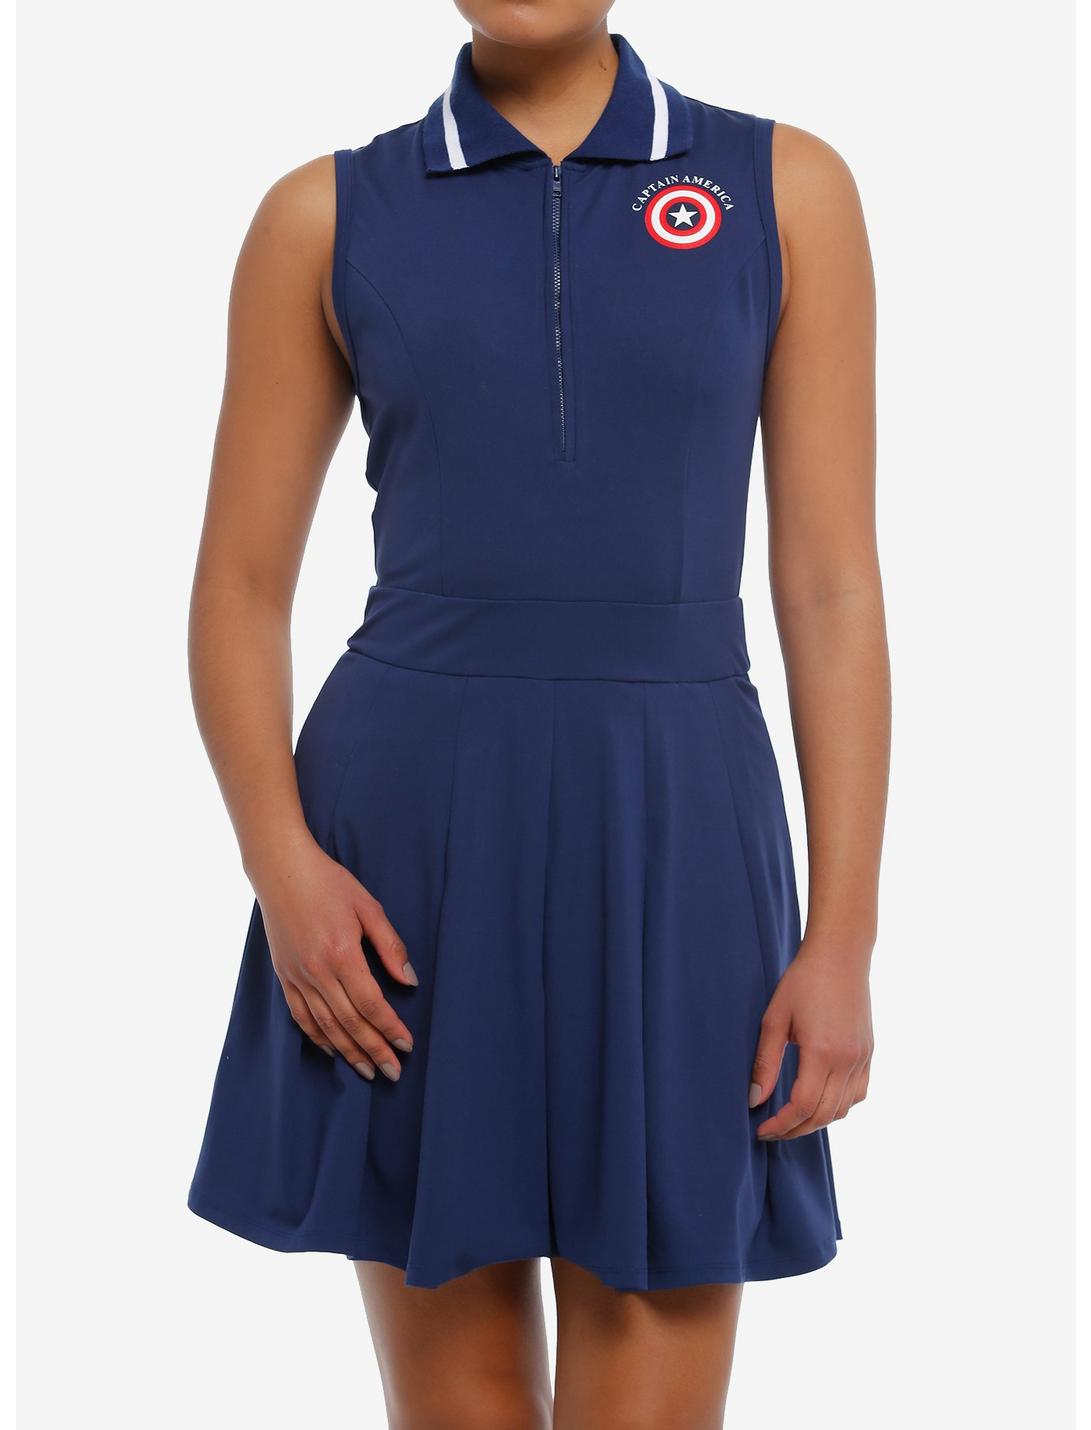 Her Universe Marvel Captain America Pleated Athletic Dress Her Universe Exclusive, NAVY, hi-res